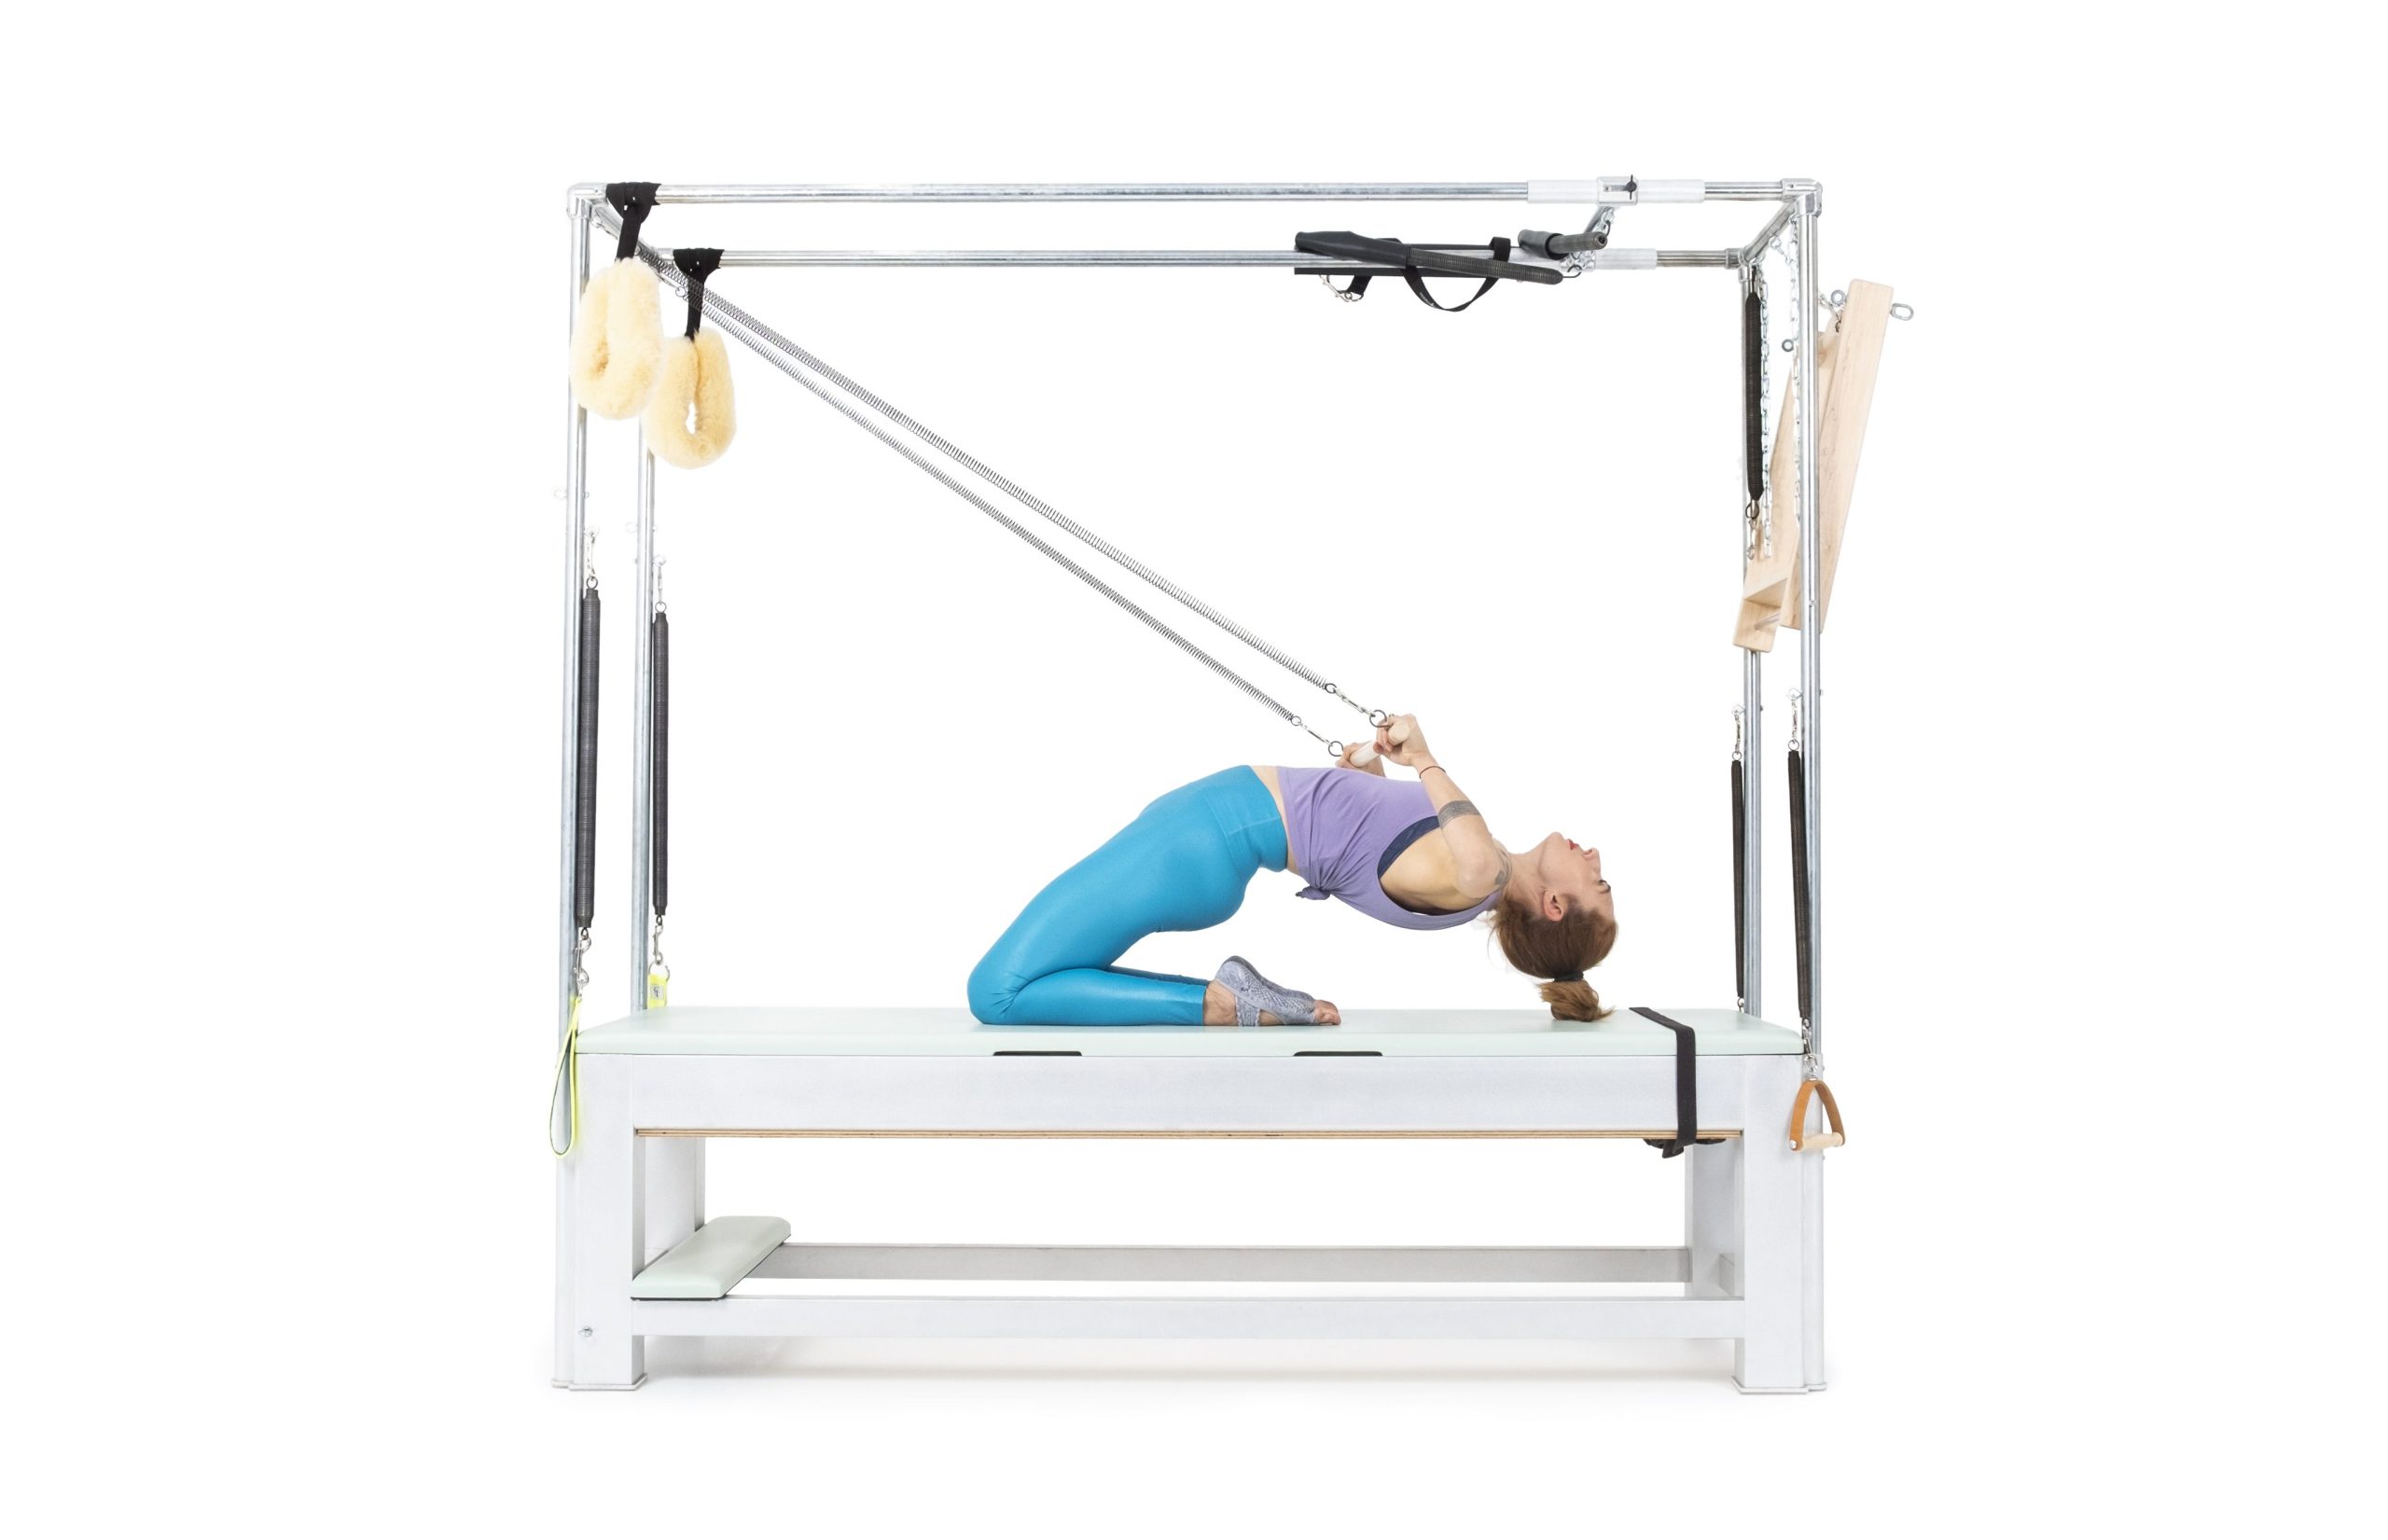 Rolling-In-and-Out-with-Roll-Back-Bar-on-the-Cadillac-or-Tower-Online-Pilates-Classes